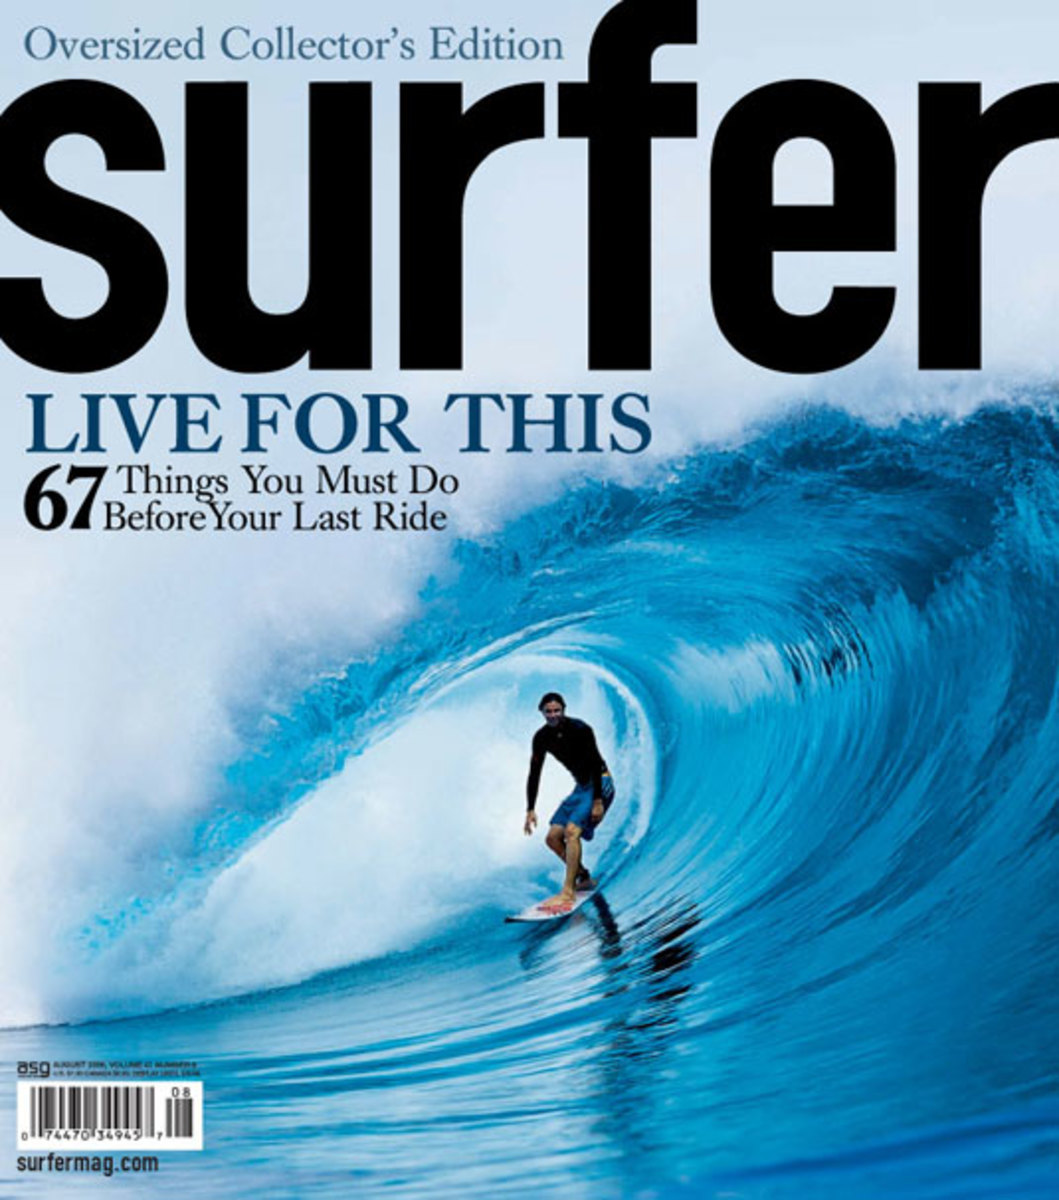 360 Surfers Issue • Surfing Life